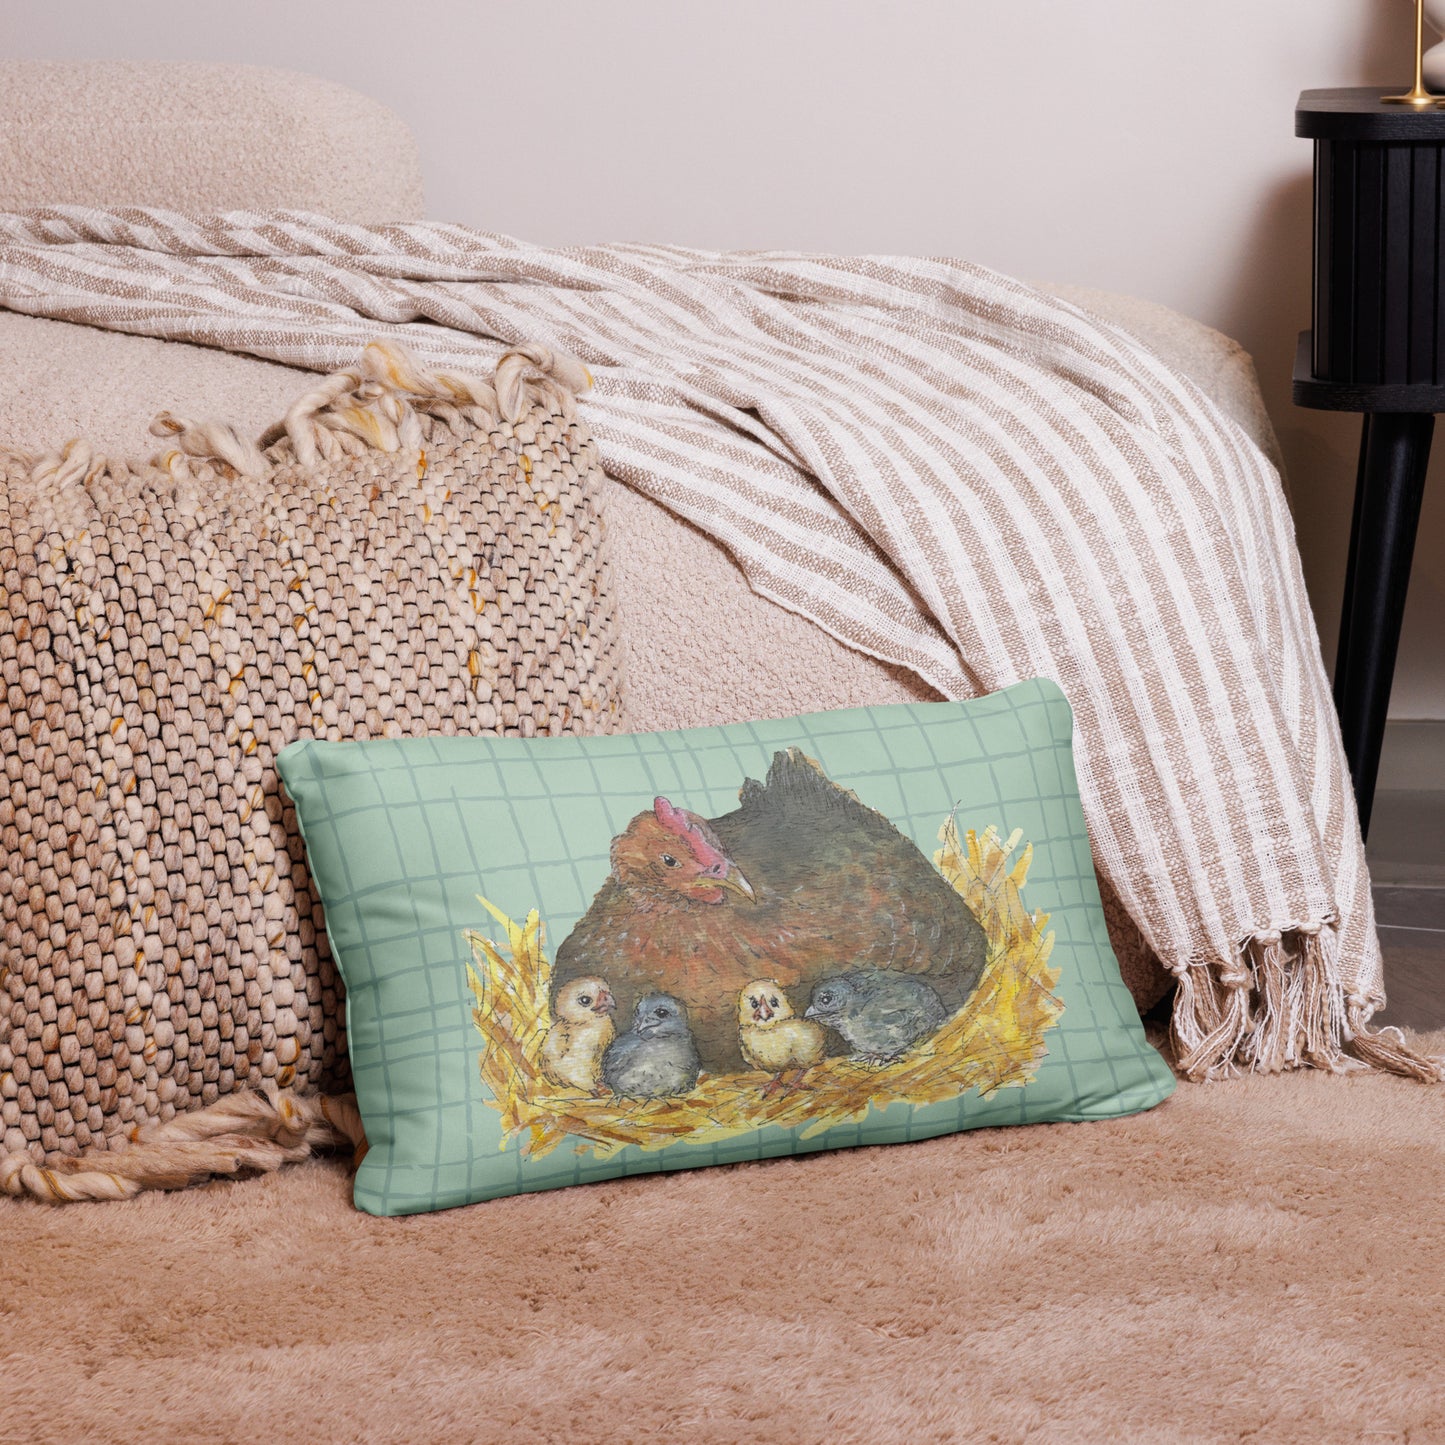 20 by 12 inch mother hen decorative throw pillow. Features Heather Silver's watercolor print of a mother hen and chicks on a green cross-hatched background. Image printed on both sides. Has a hidden zipper and washable cover. Comes with shape-retaining insert. Back view of pillow on tan carpet by beige bed.